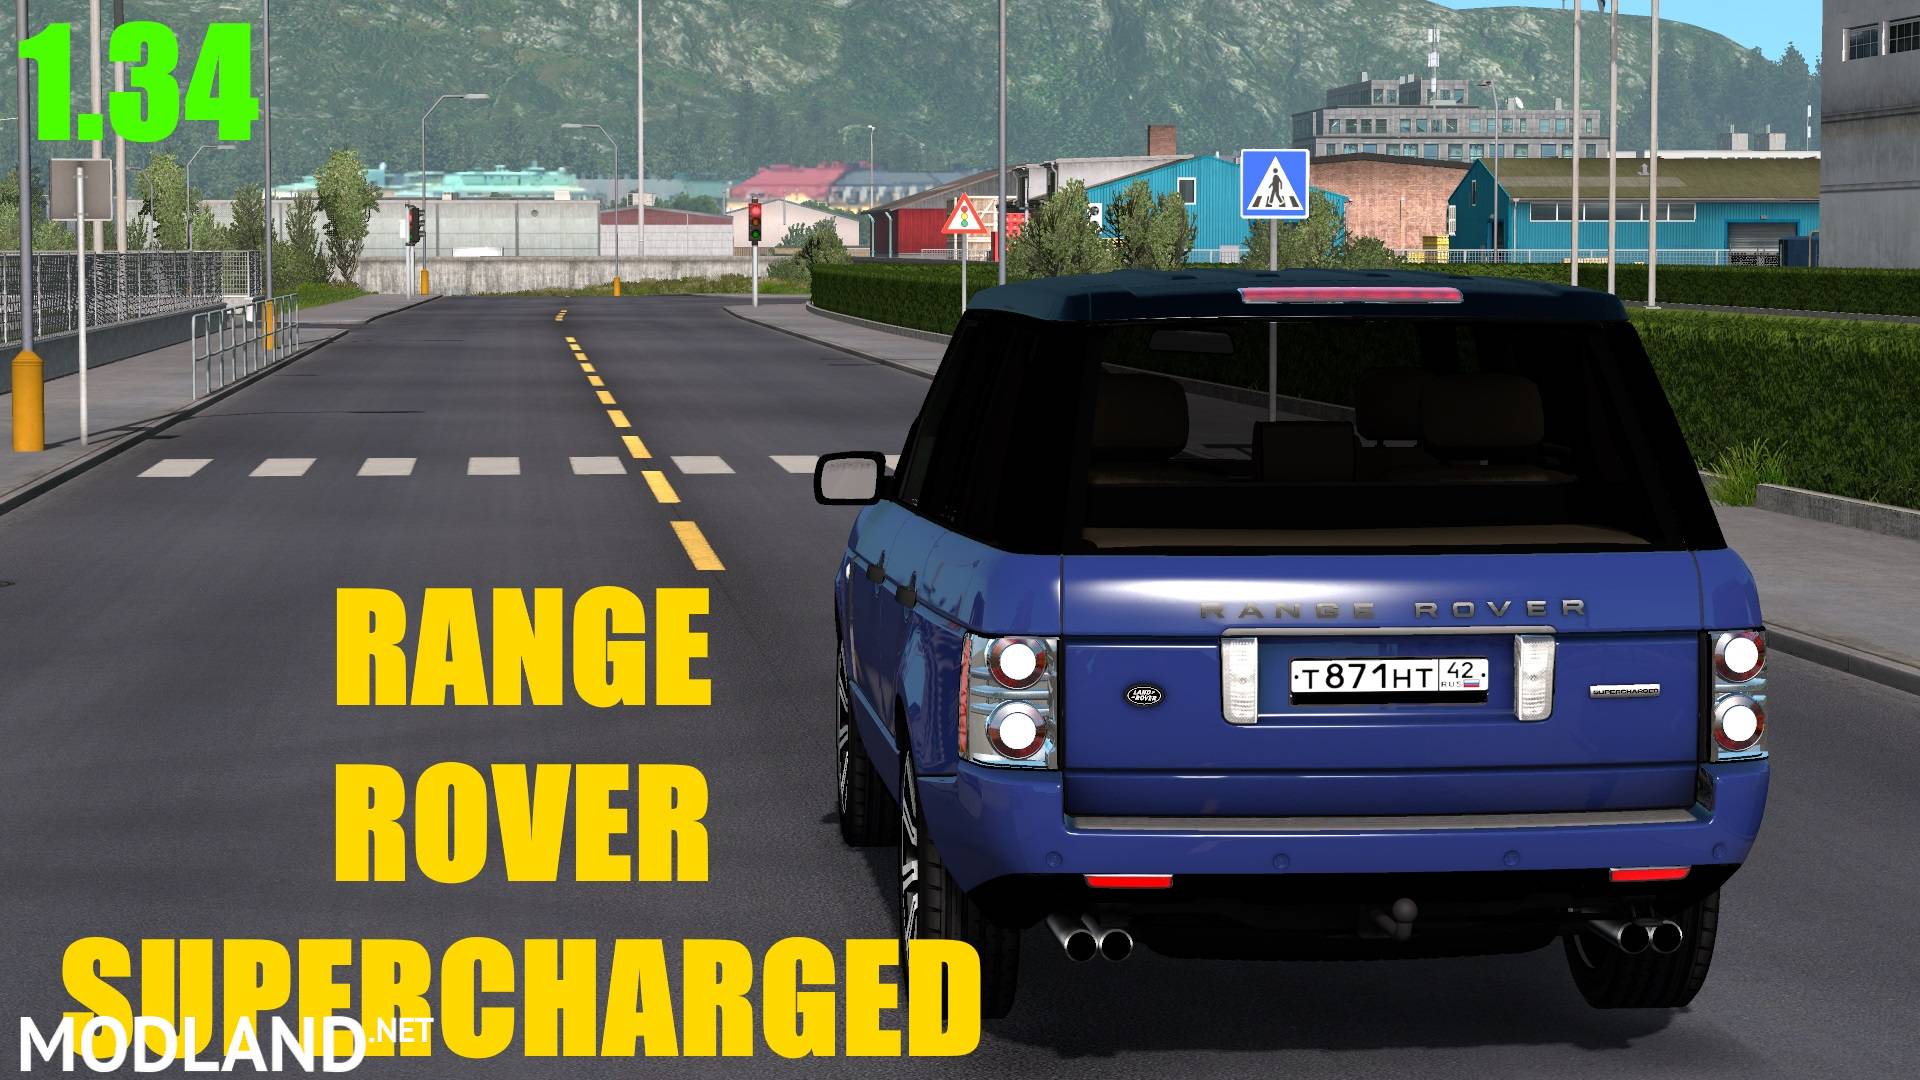 Range Rover Supercharged 2008 1.34 Fix